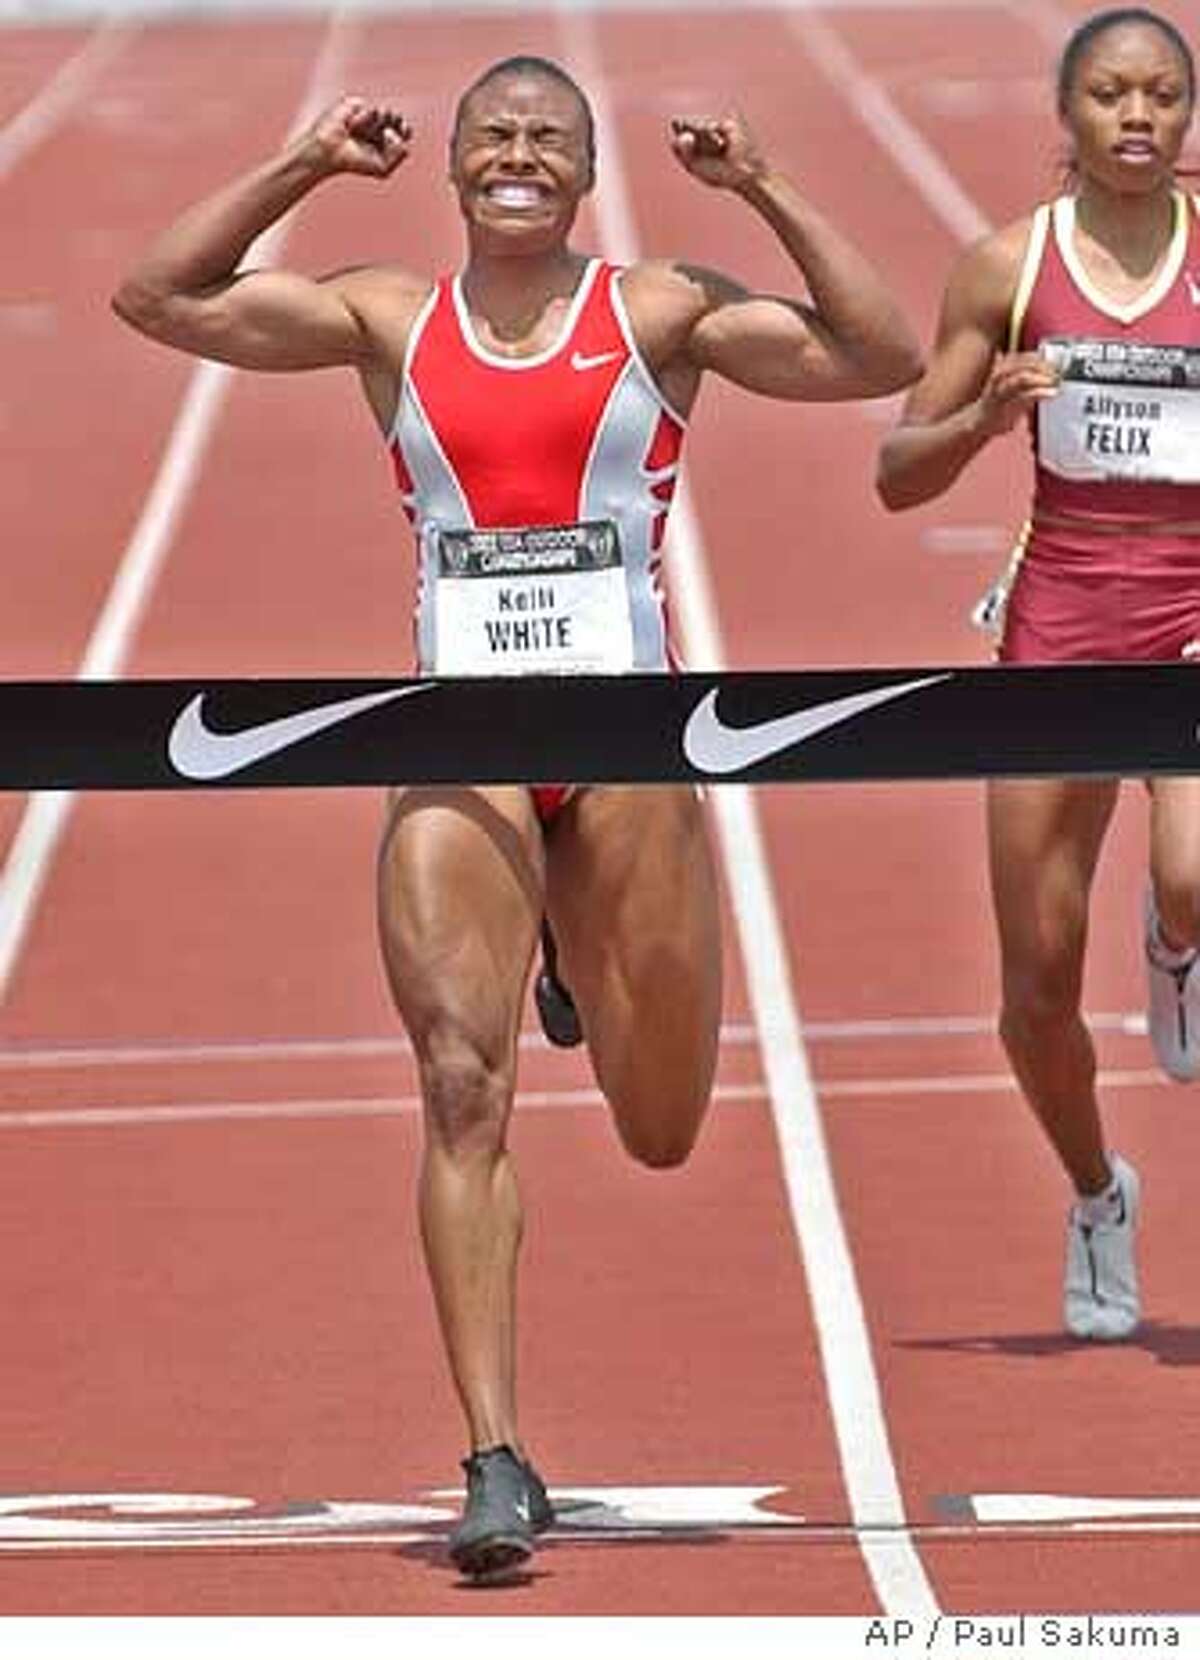 **FILE ** Sprinter Kelli White, left, reacts after winning in the finals of the 200 meters in 22.21 seconds in the U.S. track and field championships, in this June 22, 2003 photo, in Stanford, Calif. White broke down and cried Thursday as she recounted in an interview the first time she used a substance called THG, once an undetectable steroid. In her first newspaper interview since she received a two-year ban from the U.S. Anti-Doping Agency, White said she first learned of the substance four years ago when her coach, Remi Korchemny, introduced her to Bay Area Lab Co-Operative (BALCO) president Victor Conte. (AP Photo/Paul Sakuma, file) Ran on: 12-12-2004 Sprinter Kelli White won two world titles while using steroids. A JUNE 22 2003 FILE PHOTO Ran on: 02-21-2005 Sprinters Kelli White (left) and Tim Montgomery say Dr. Brian Goldman helped them obtain performance-enhancing substances. White says Goldman provided her with modafinil, while Montgomery says Goldman wrote a prescription for a drug that boosts testosterone. Ran on: 02-21-2005 Sprinters Kelli White (left) and Tim Montgomery say Dr. Brian Goldman helped them obtain performance-enhancing substances. White says Goldman provided her with modafinil, while Montgomery says Goldman wrote a prescription for a drug that boosts testosterone. Ran on: 02-21-2005 Sprinters Kelli White (left) and Tim Montgomery say Dr. Brian Goldman helped them obtain performance-enhancing substances. White says Goldman provided her with modafinil, while Montgomery says Goldman wrote a prescription for a drug that boosts testosterone.